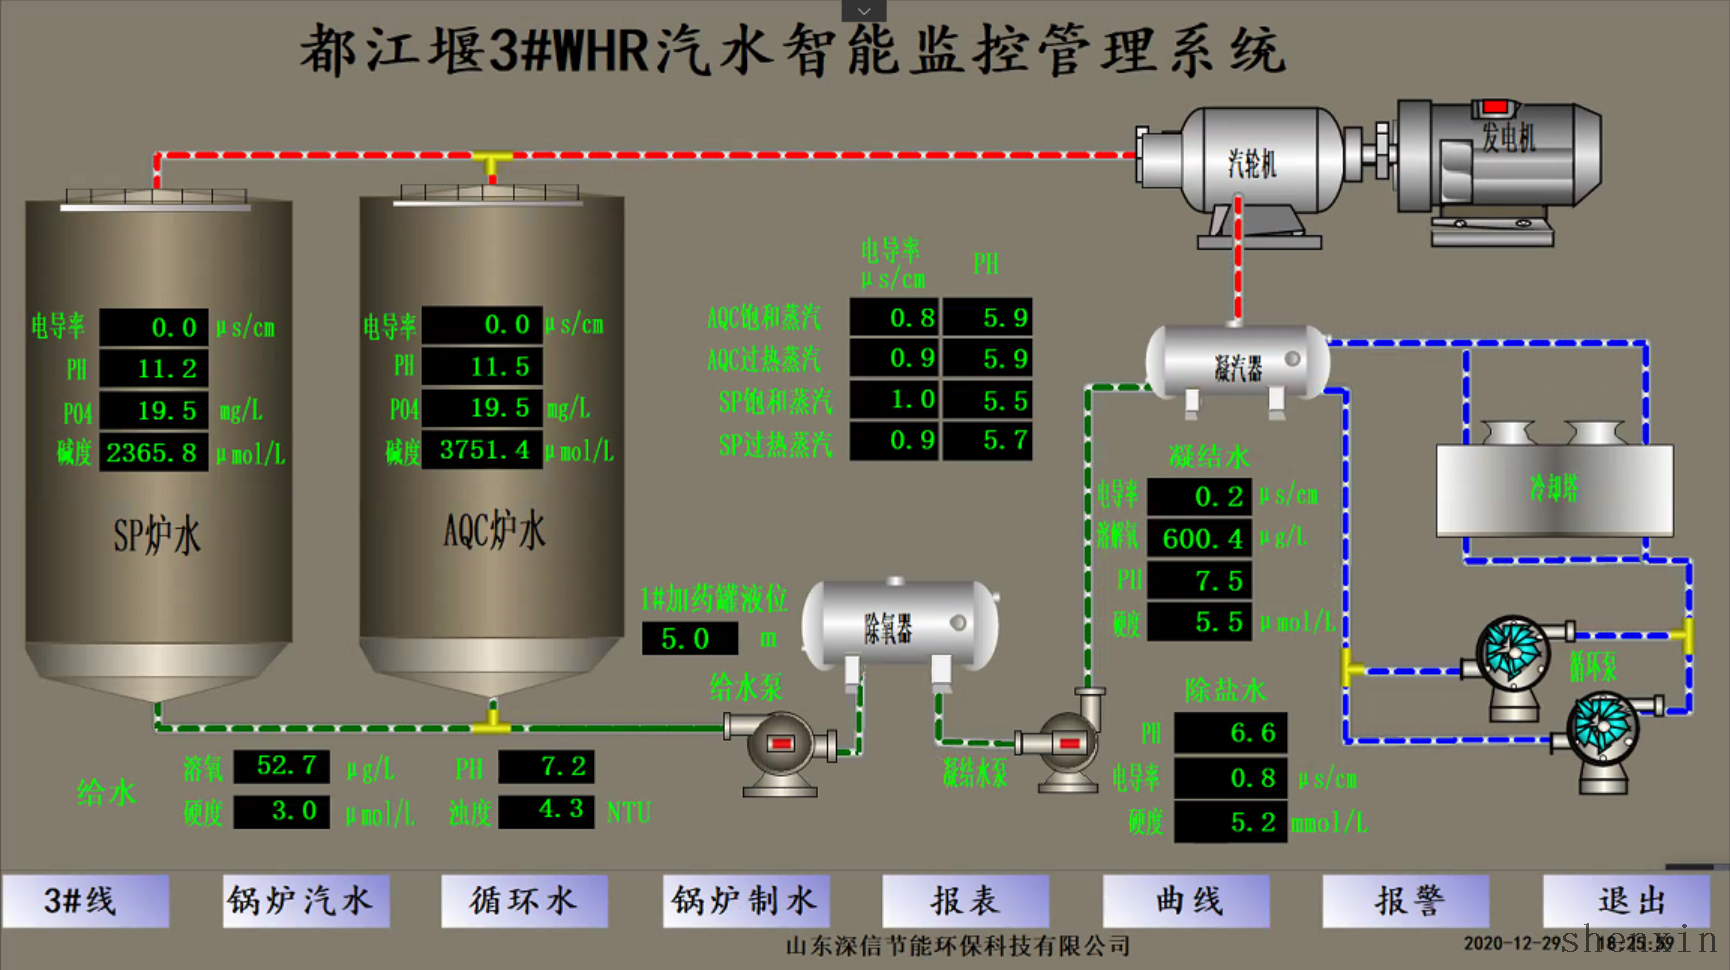 Intelligent automatic control system for waste heat power station